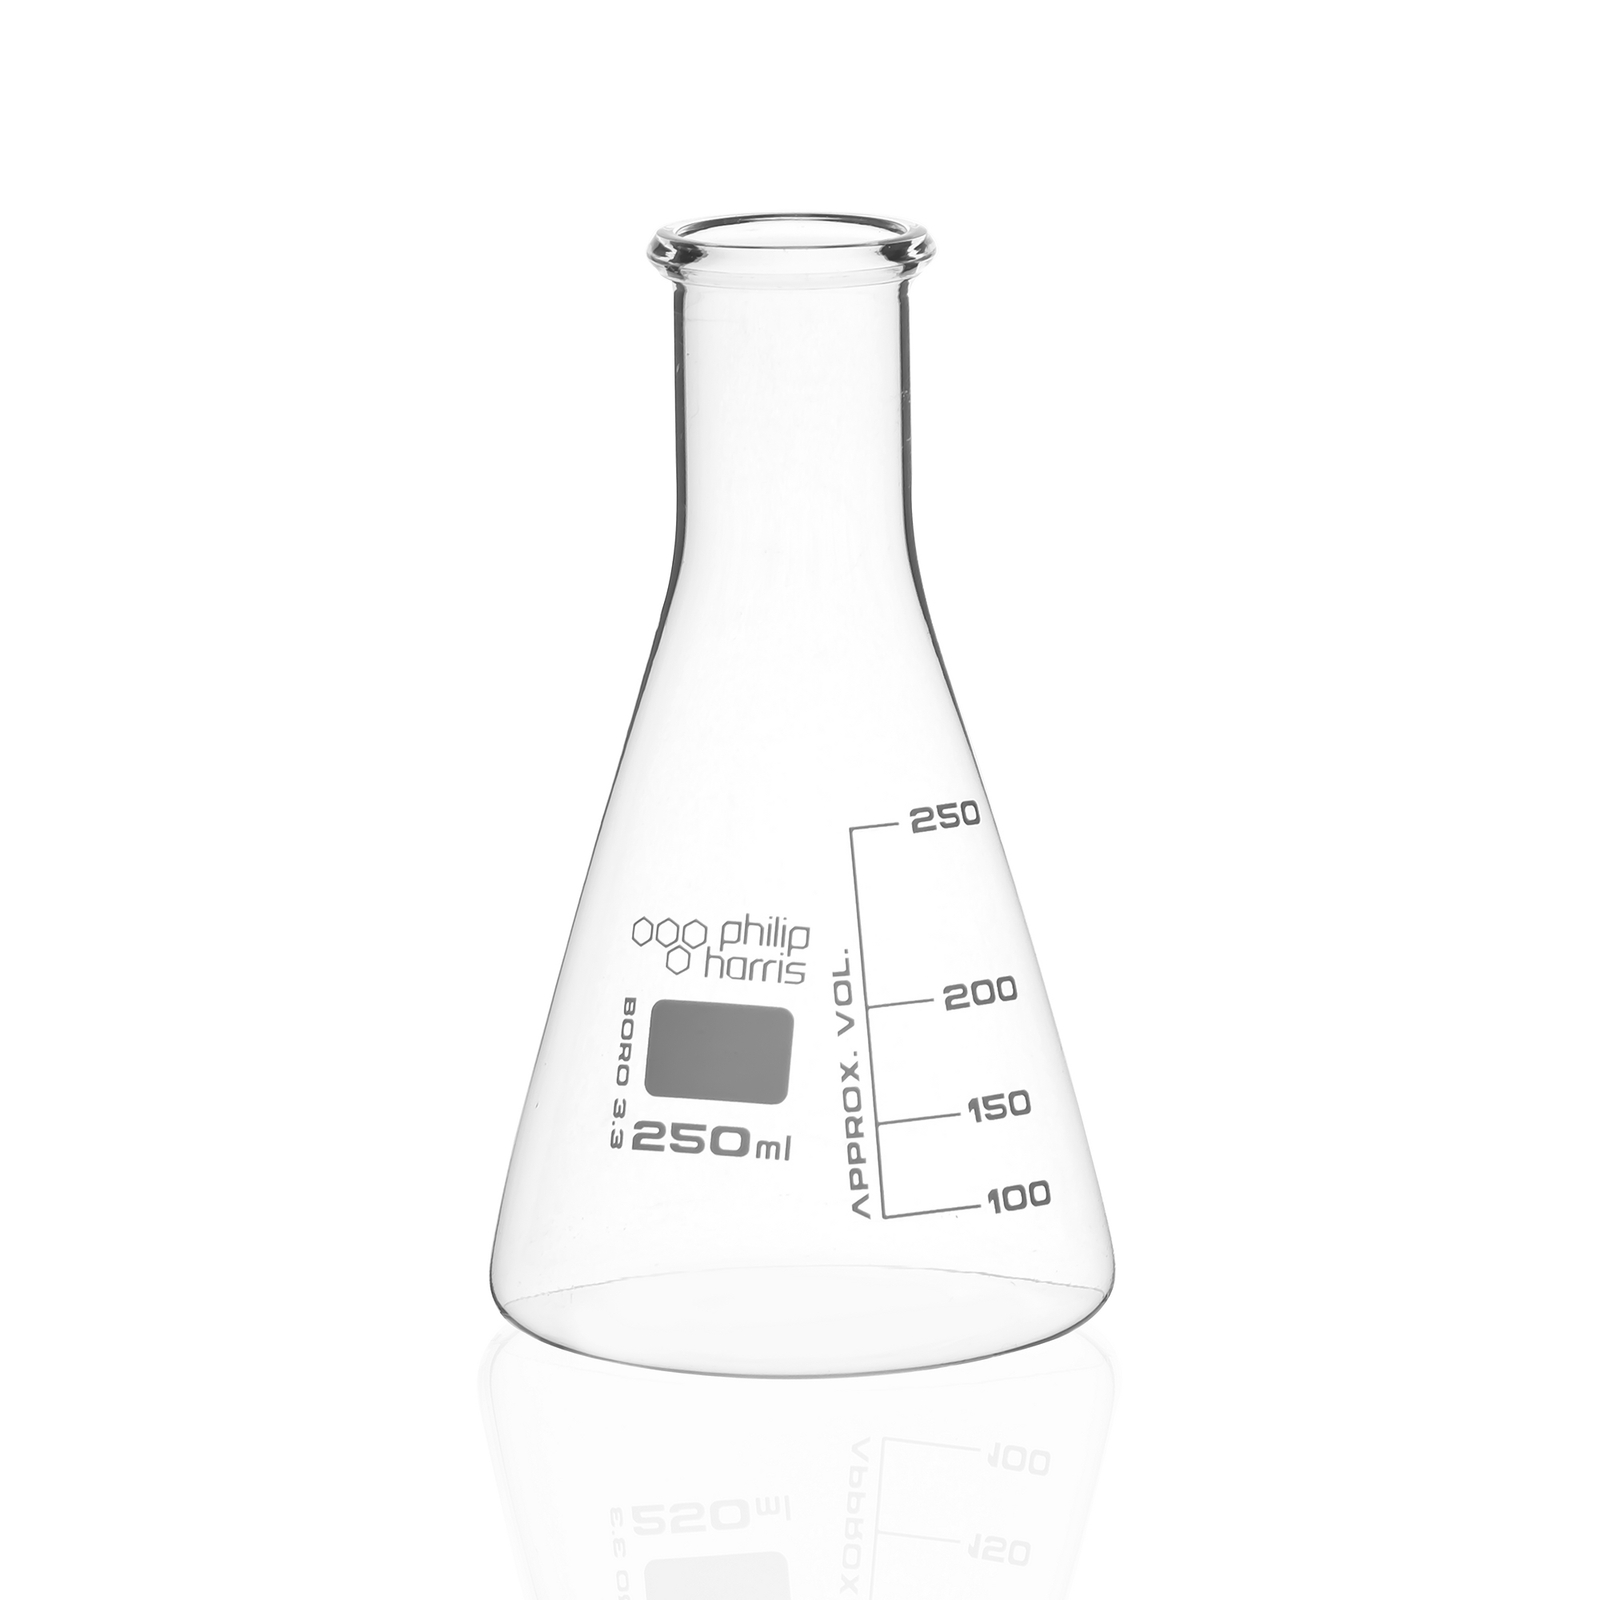 Philip Harris Narrow Mouth Conical Flask - 250ml - Pack of 12